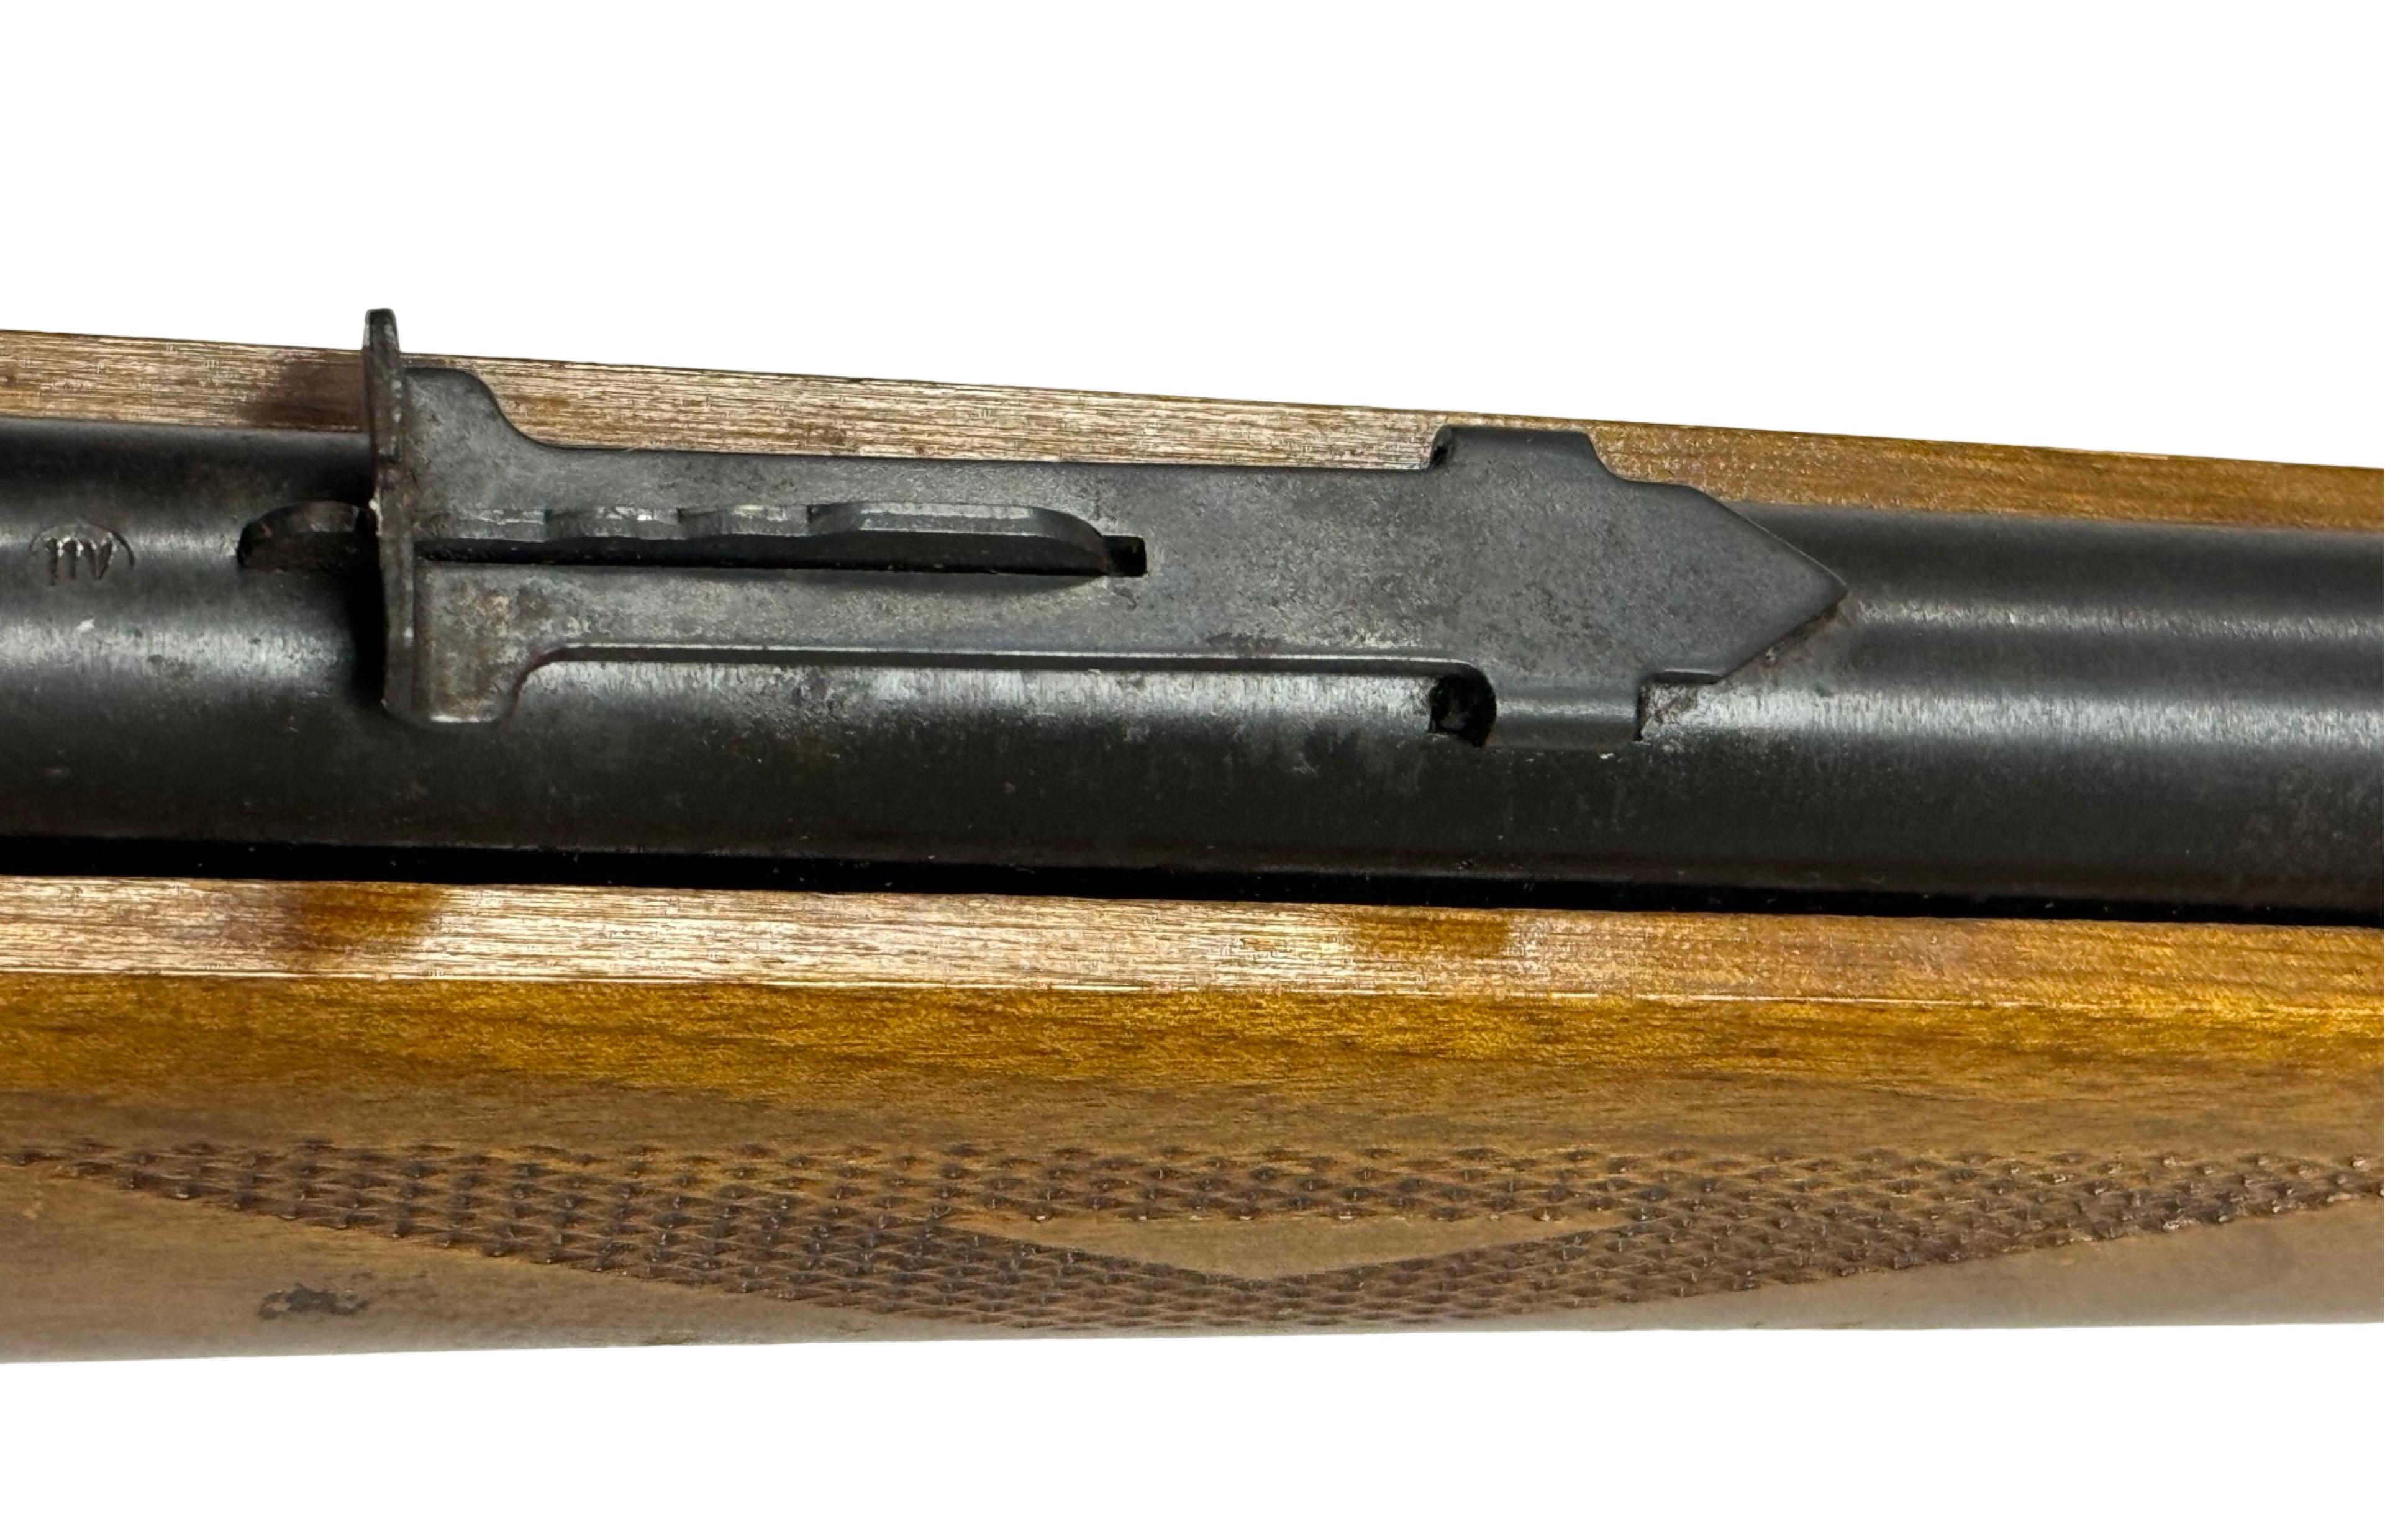 Springfield Model 187 T-S .22 S-L-LR Semi-Automatic Rifle with Factory Scope